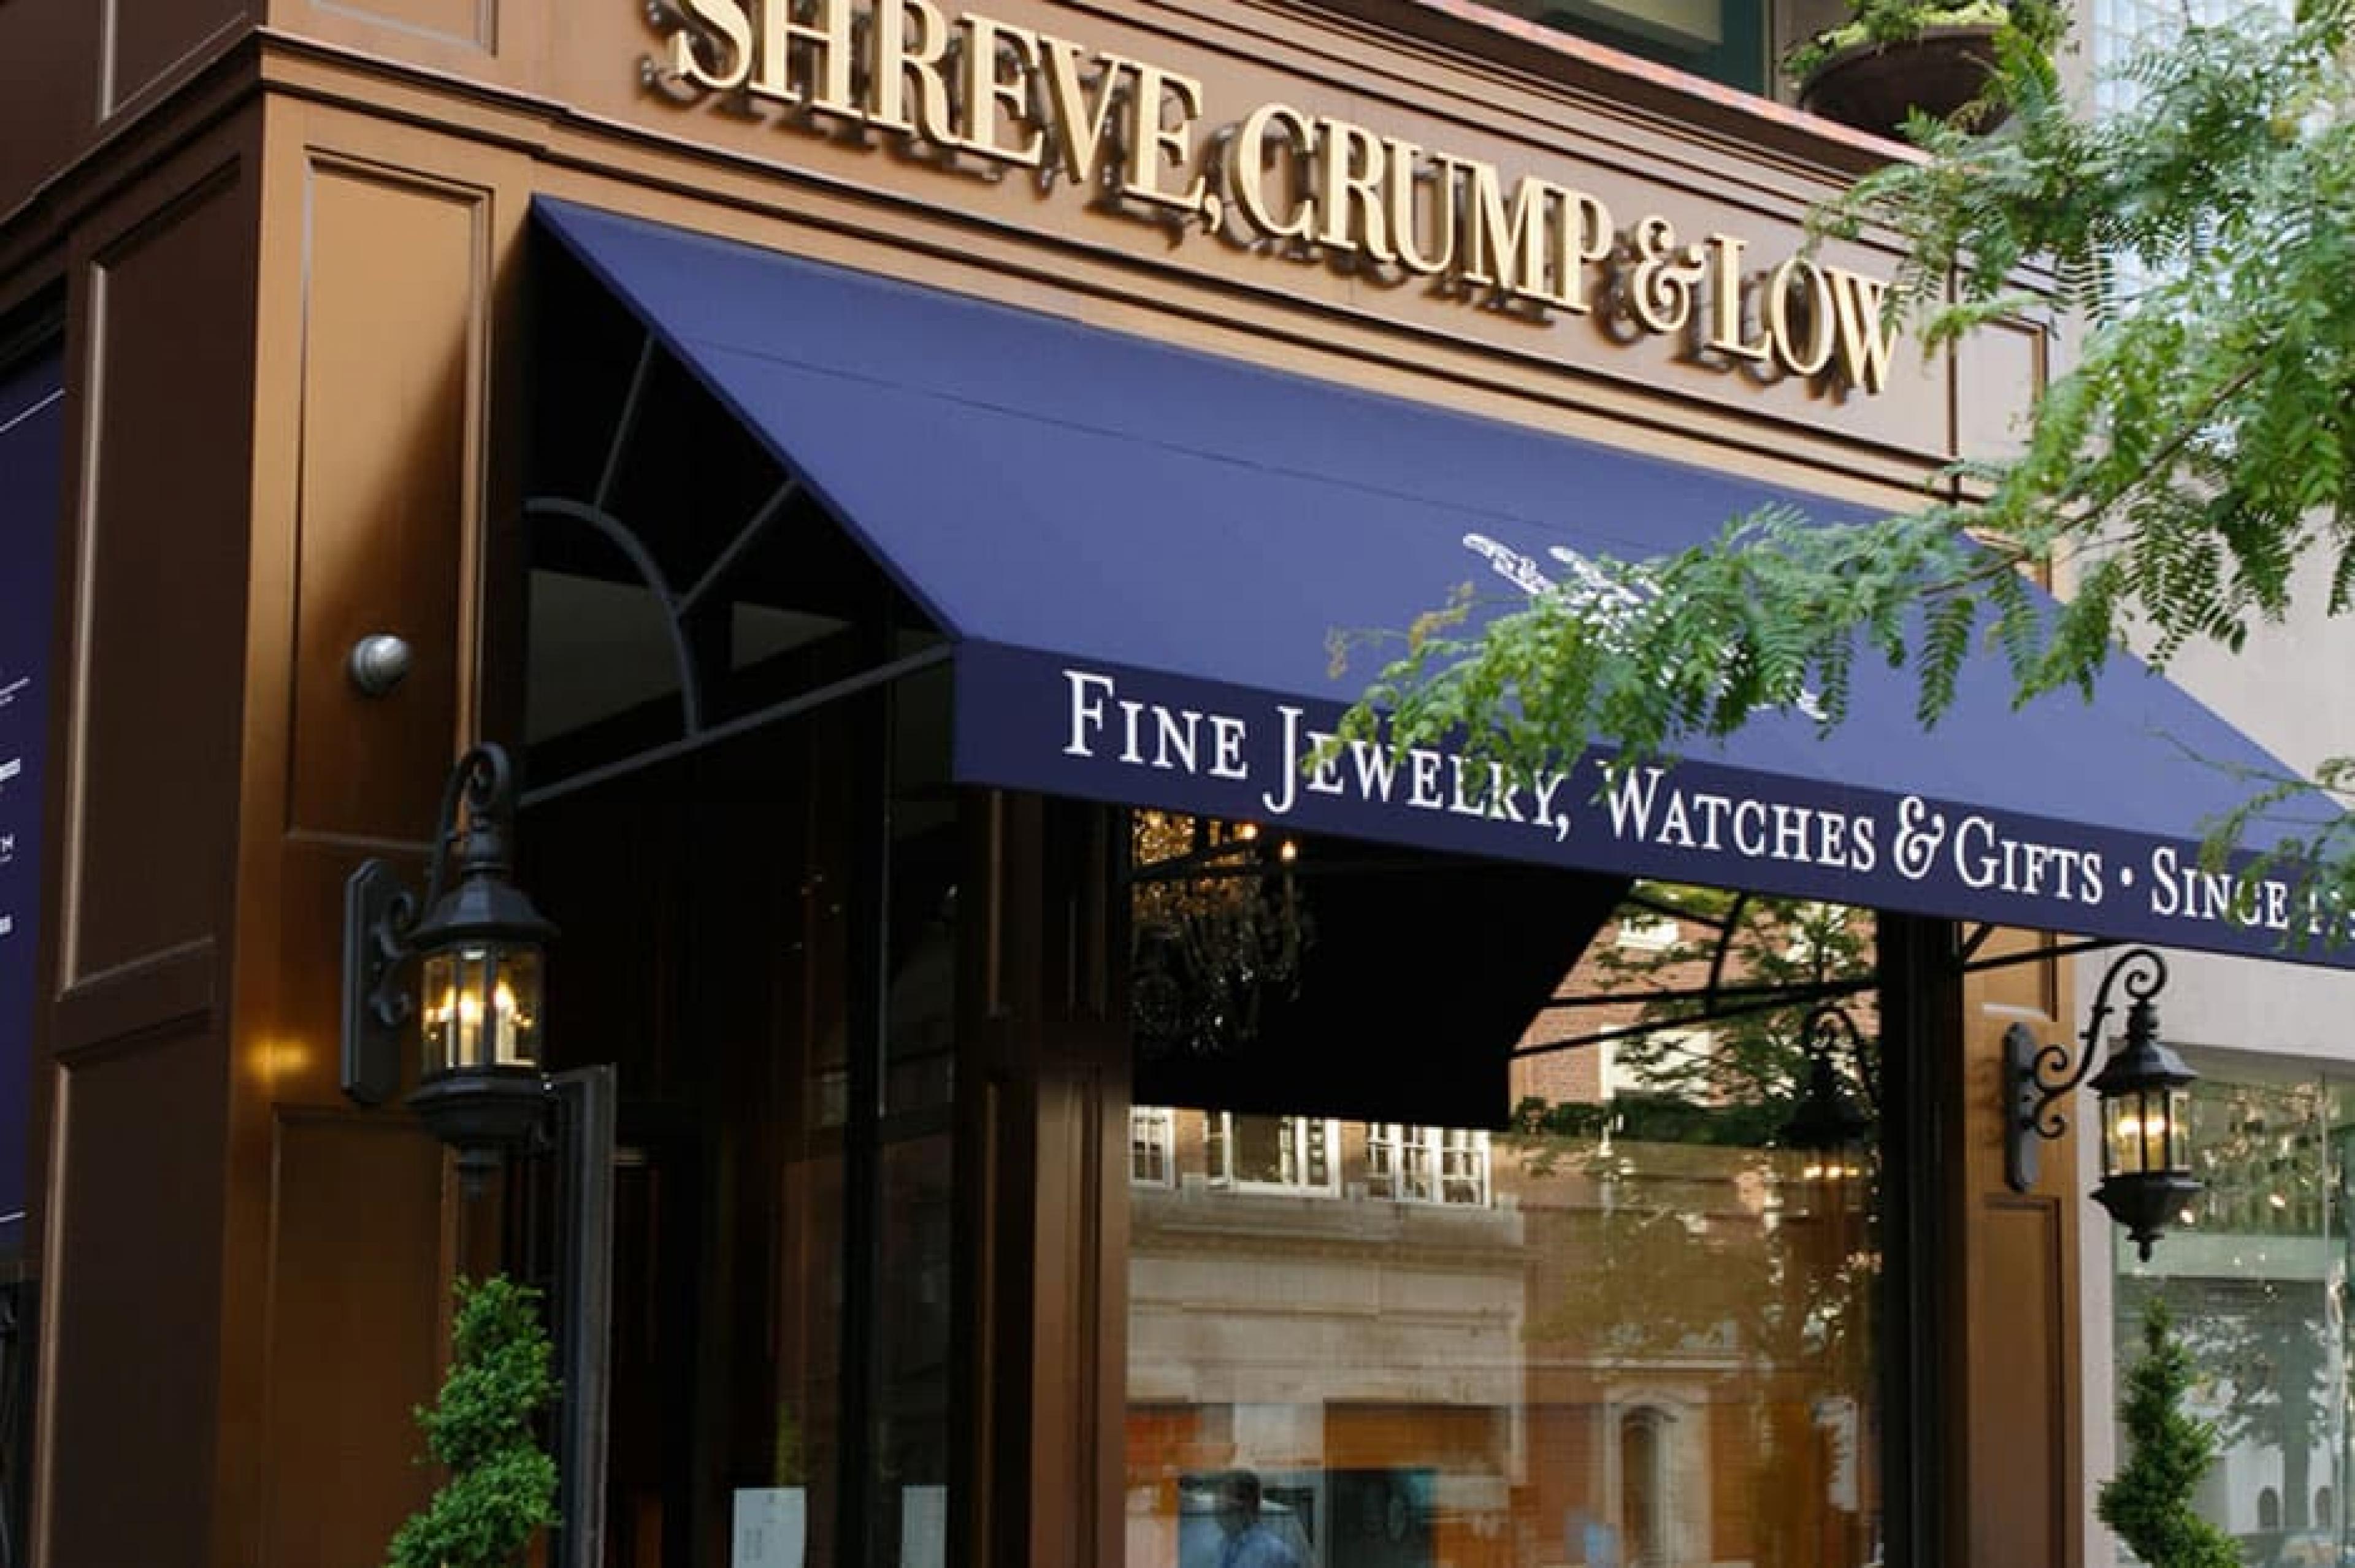 Exteriors at  Shreve, Crump and Low, Boston, New England